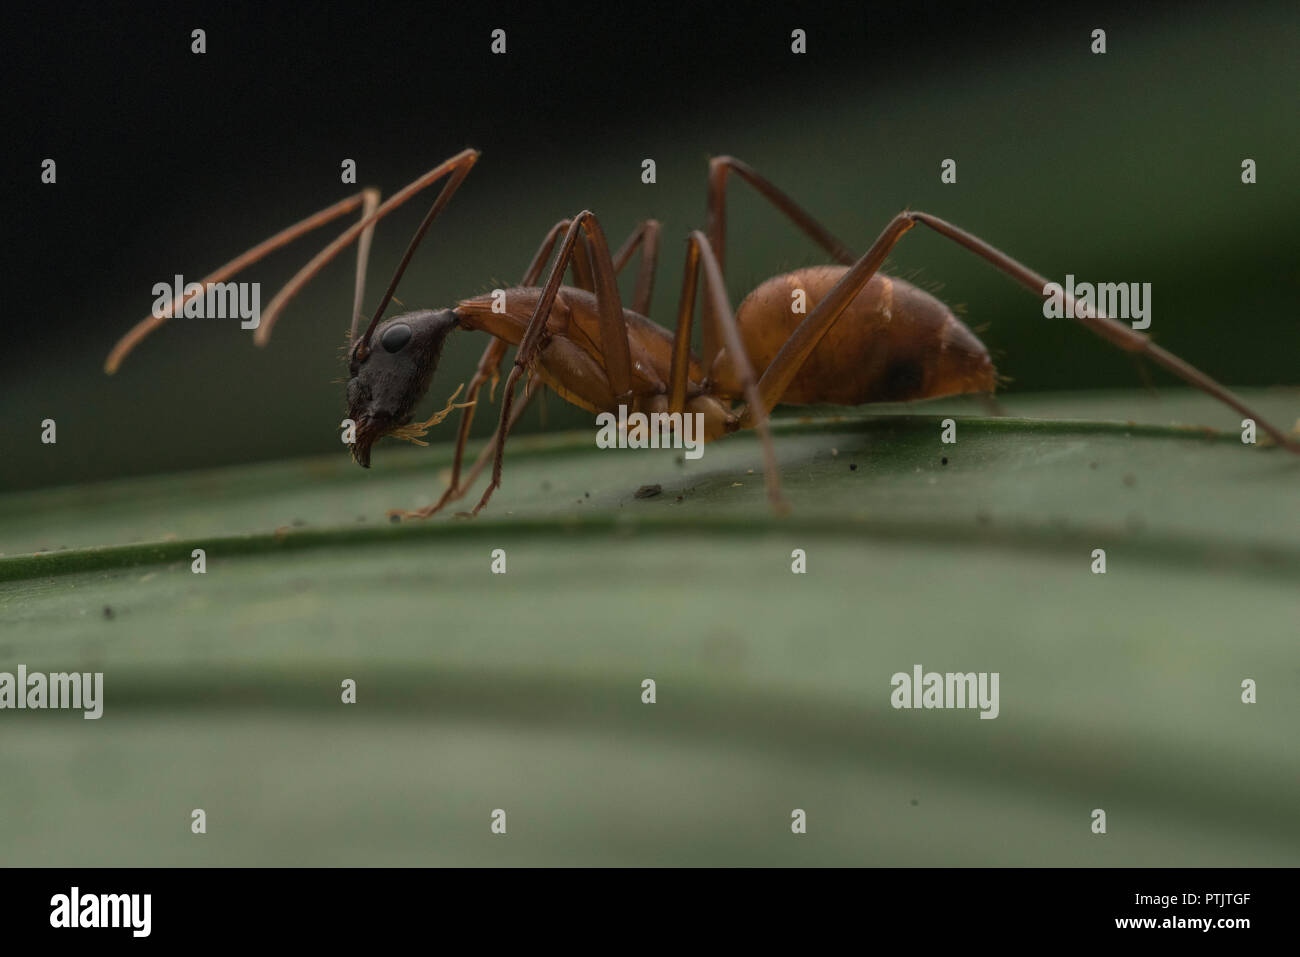 A Species Of Carpenter Ant Camponotus Atriceps From The Amazon Rainforest In Peru Stock Photo Alamy